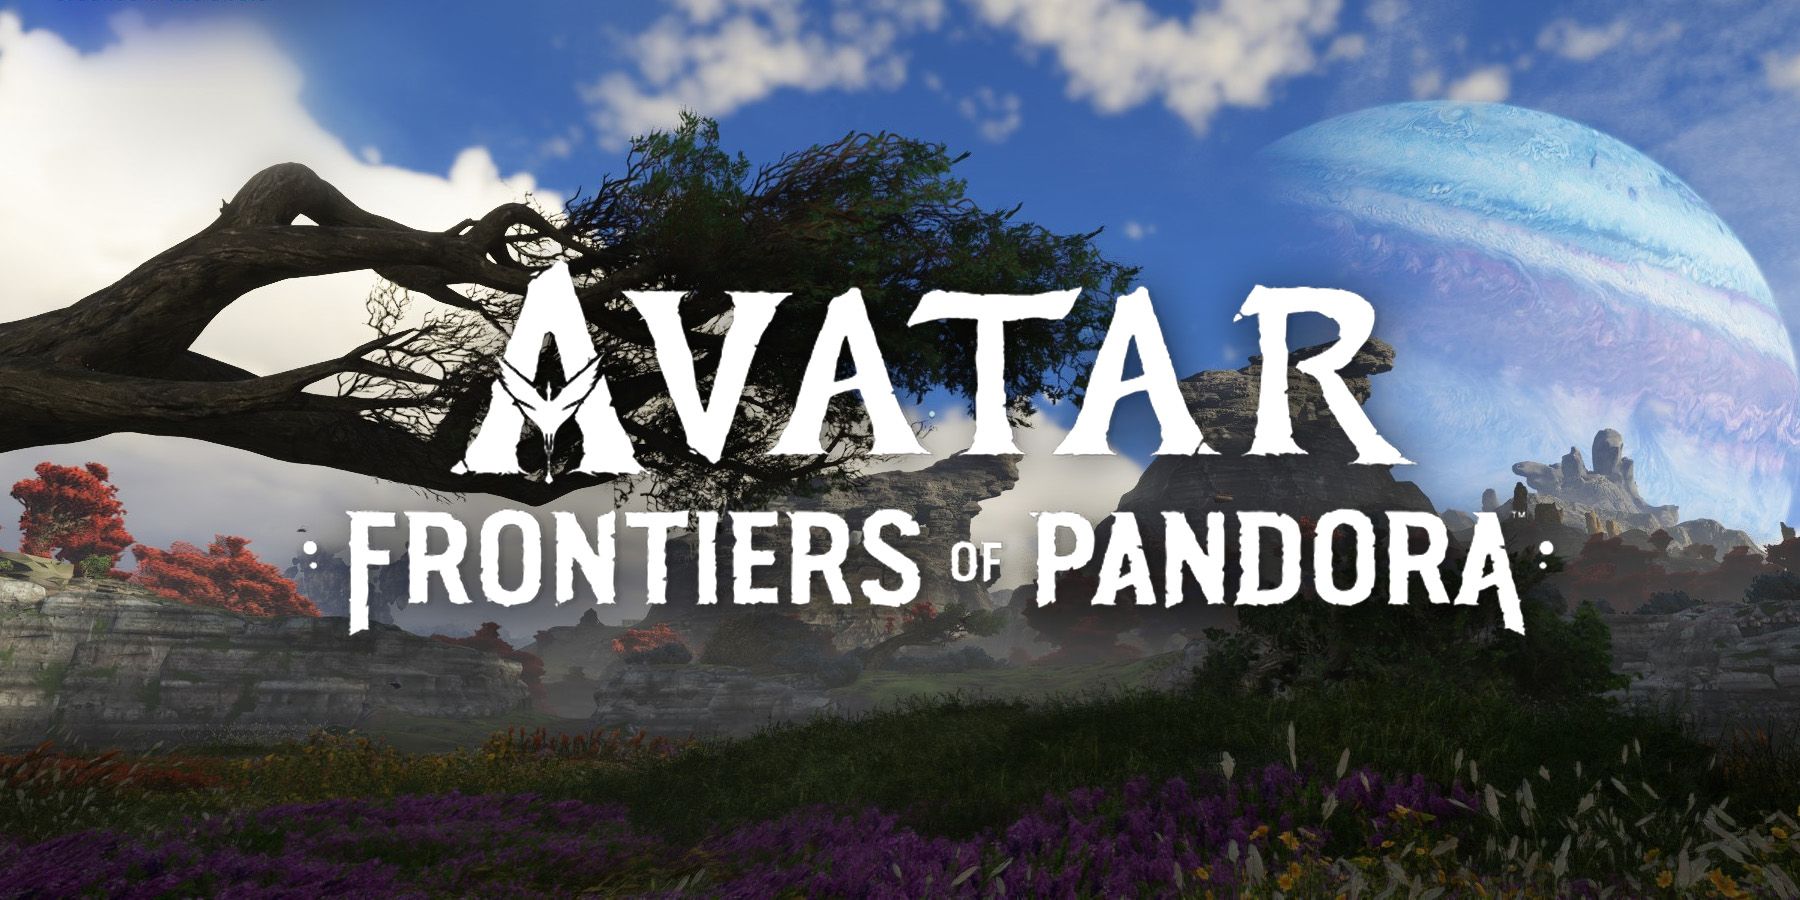 Avatar Frontiers of Pandora Banner image showing a landscape of wide plains with a planet visible in the sky.